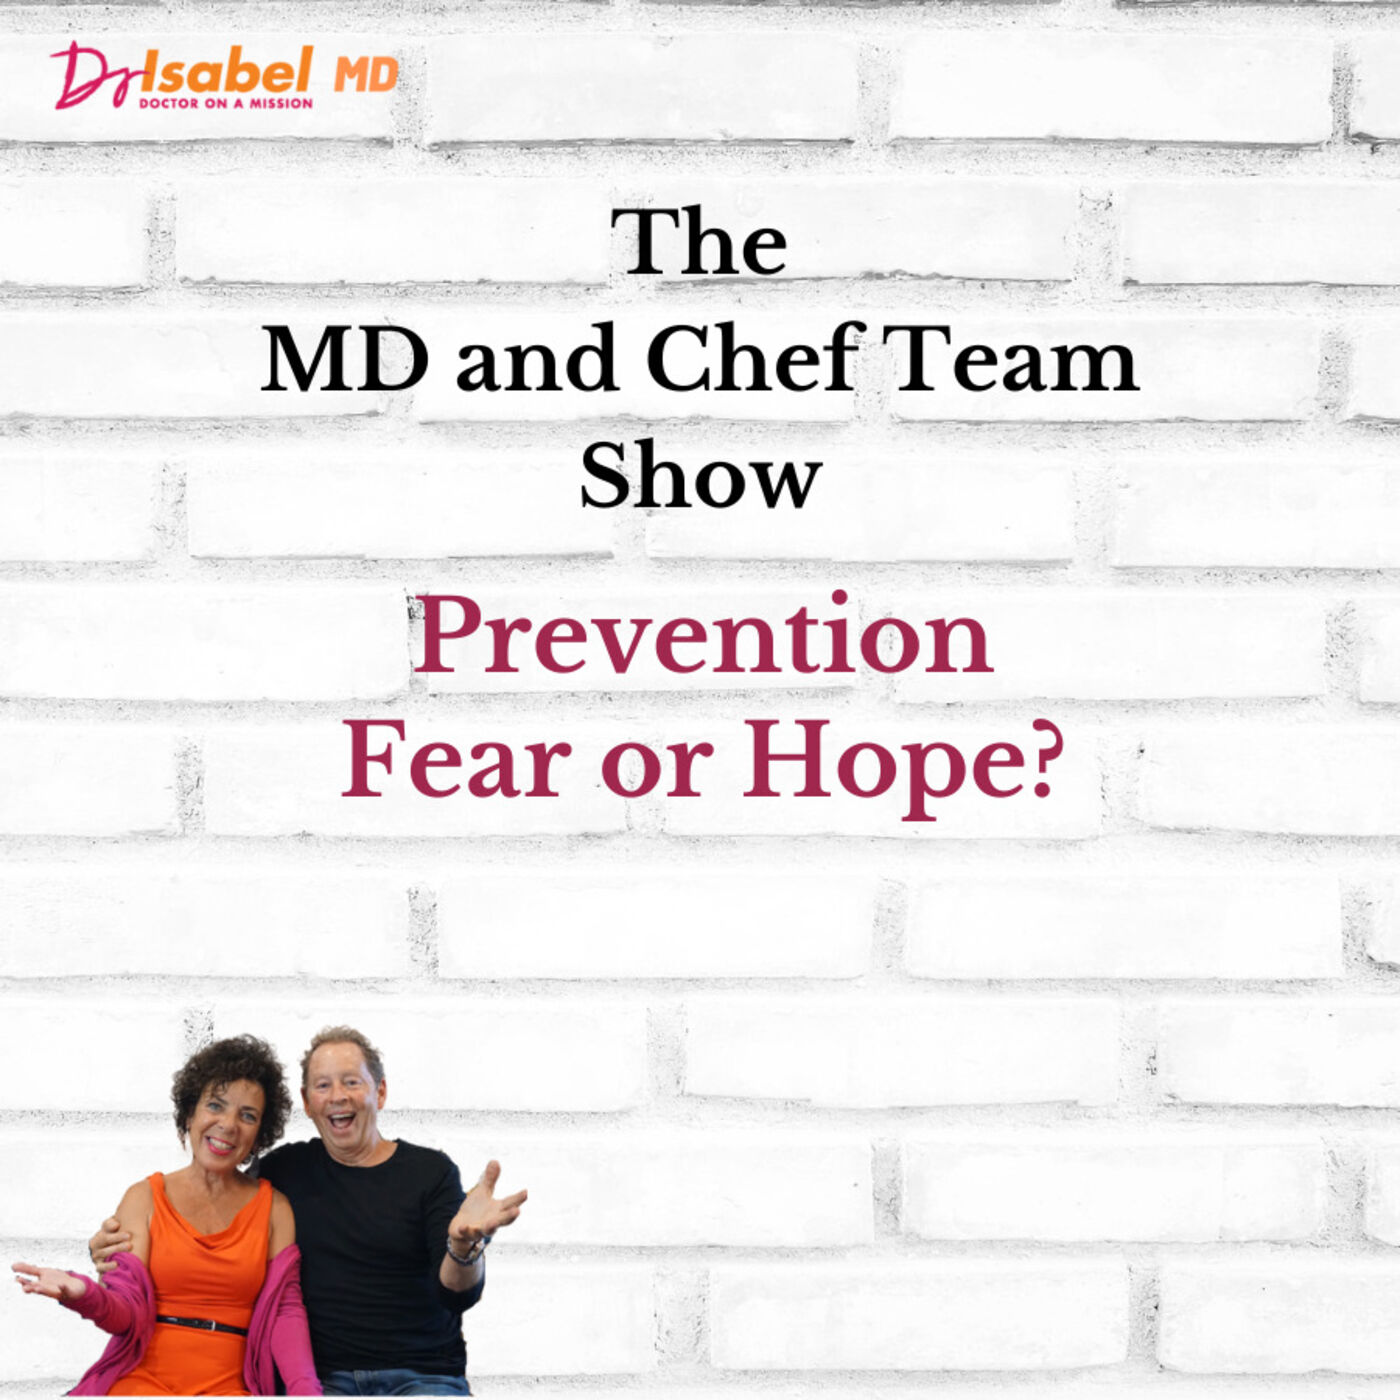 Prevention - Fear or Hope?